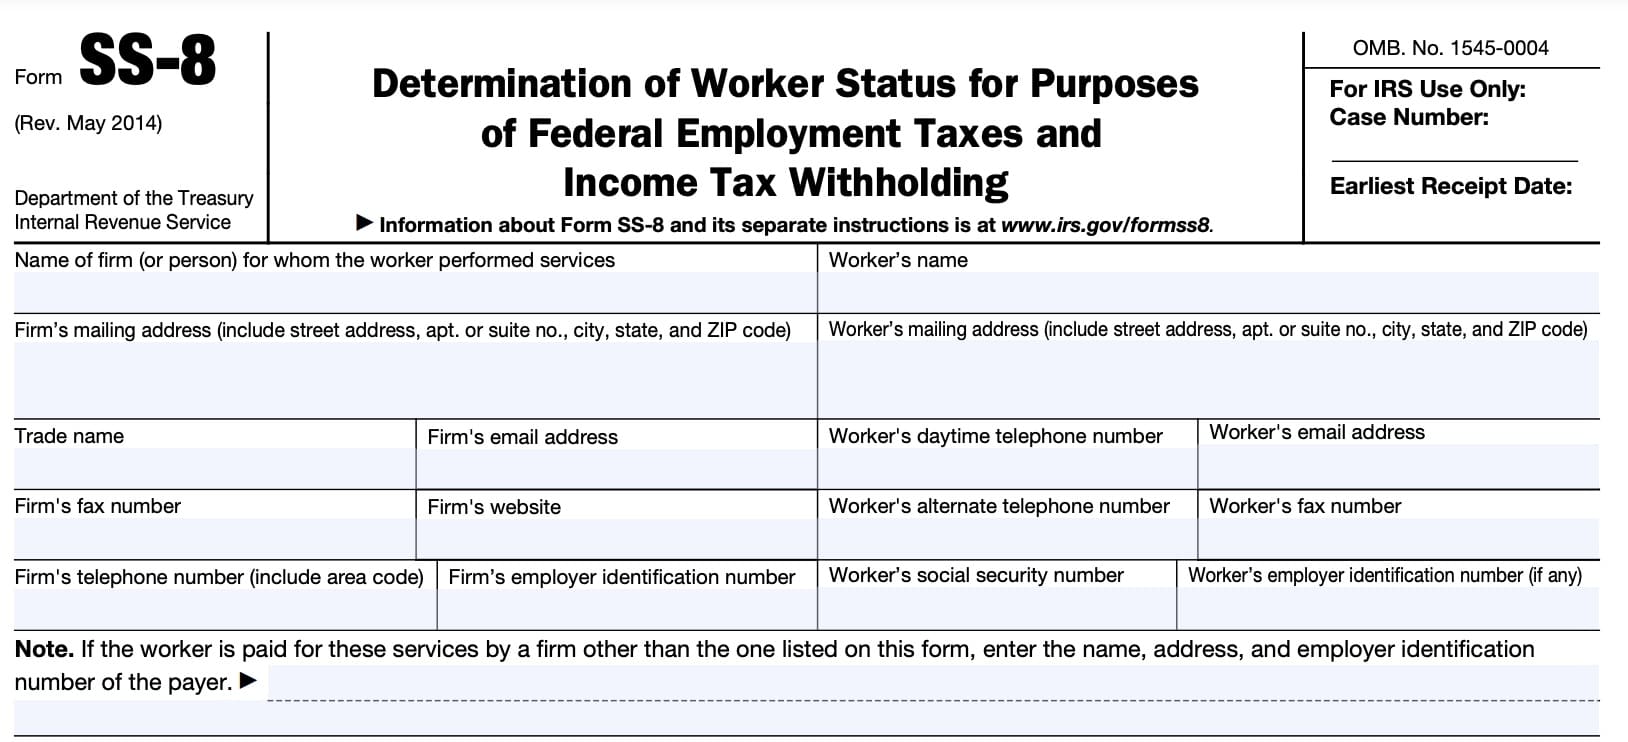 form ss-8, determination of worker status for purposes of federal employment taxes and income tax withholding